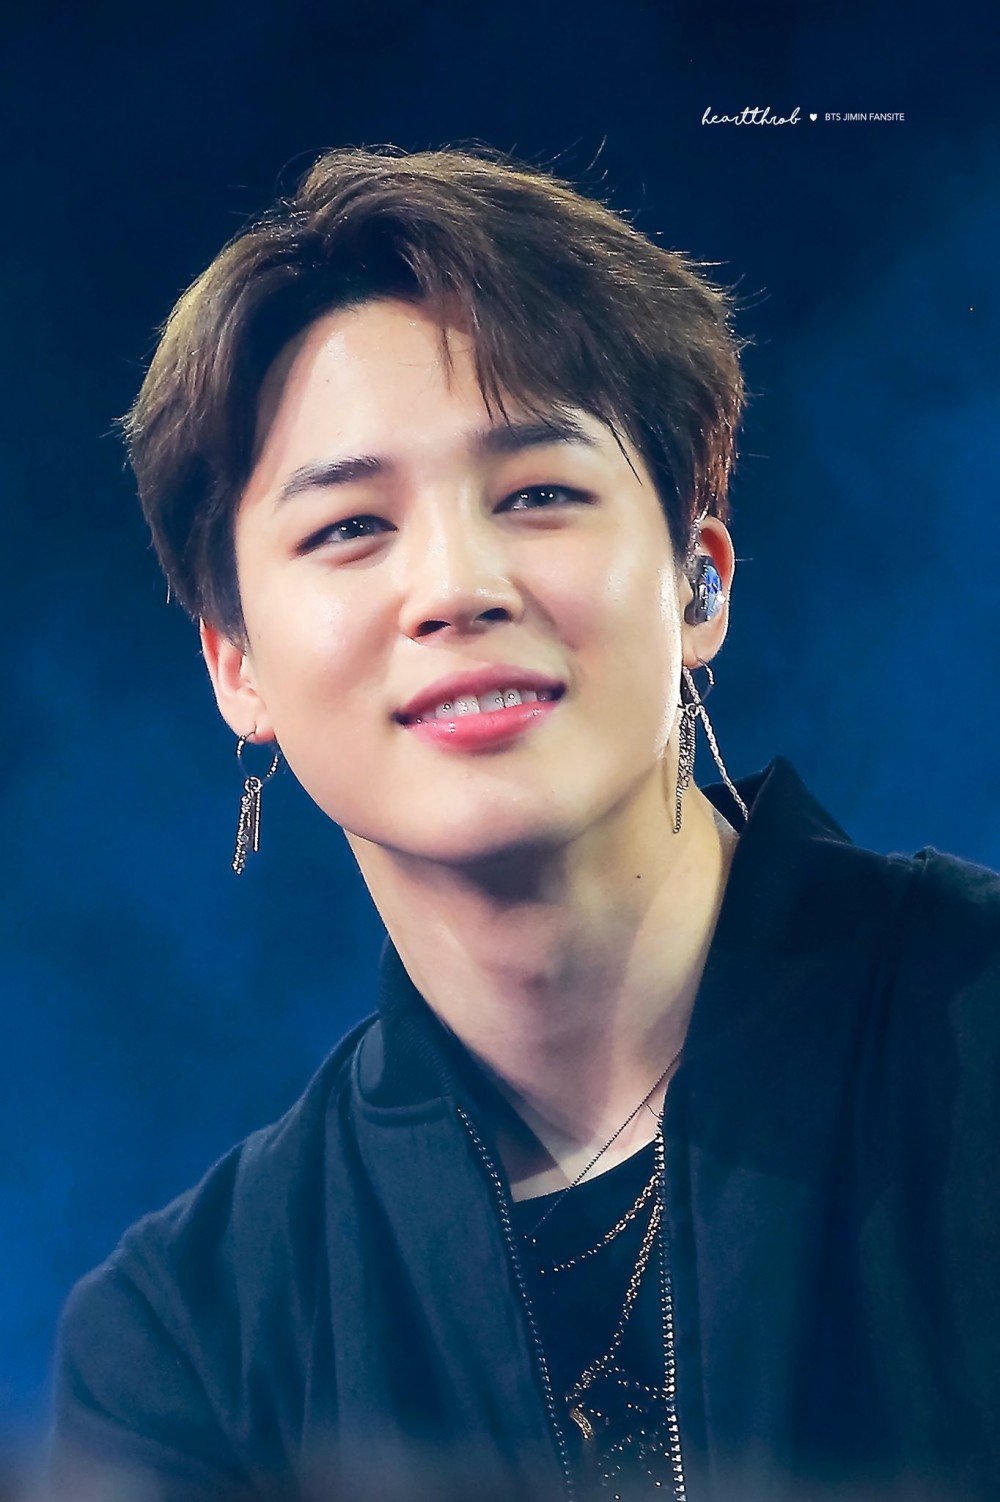 Top 999+ jimin images – Amazing Collection jimin images Full 4K